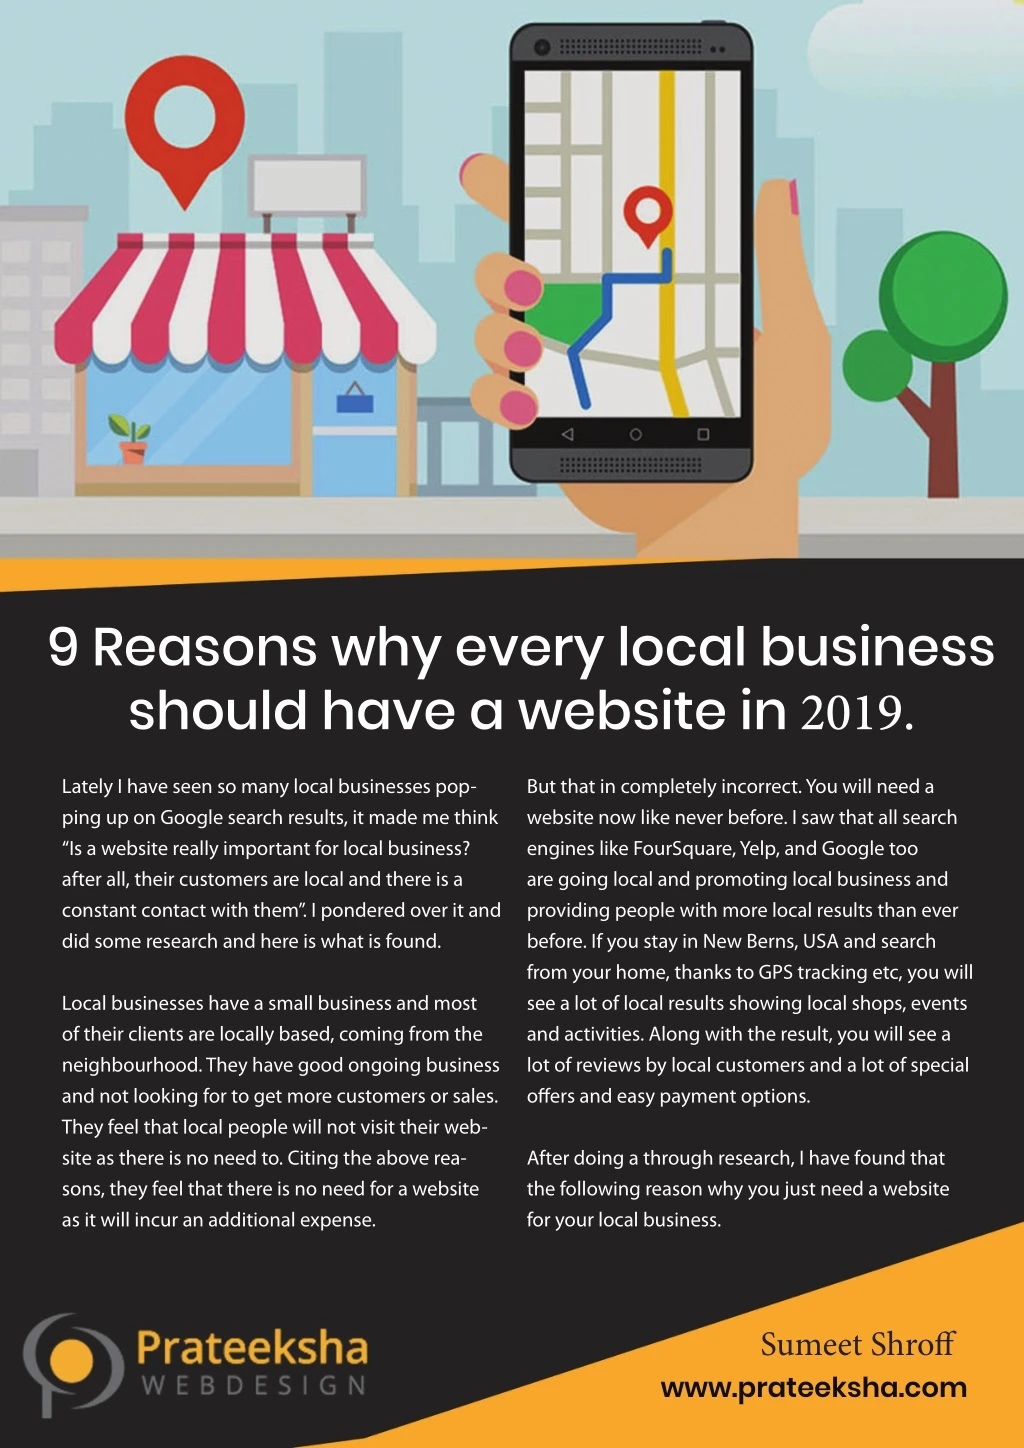 9 reasons why every local business should have